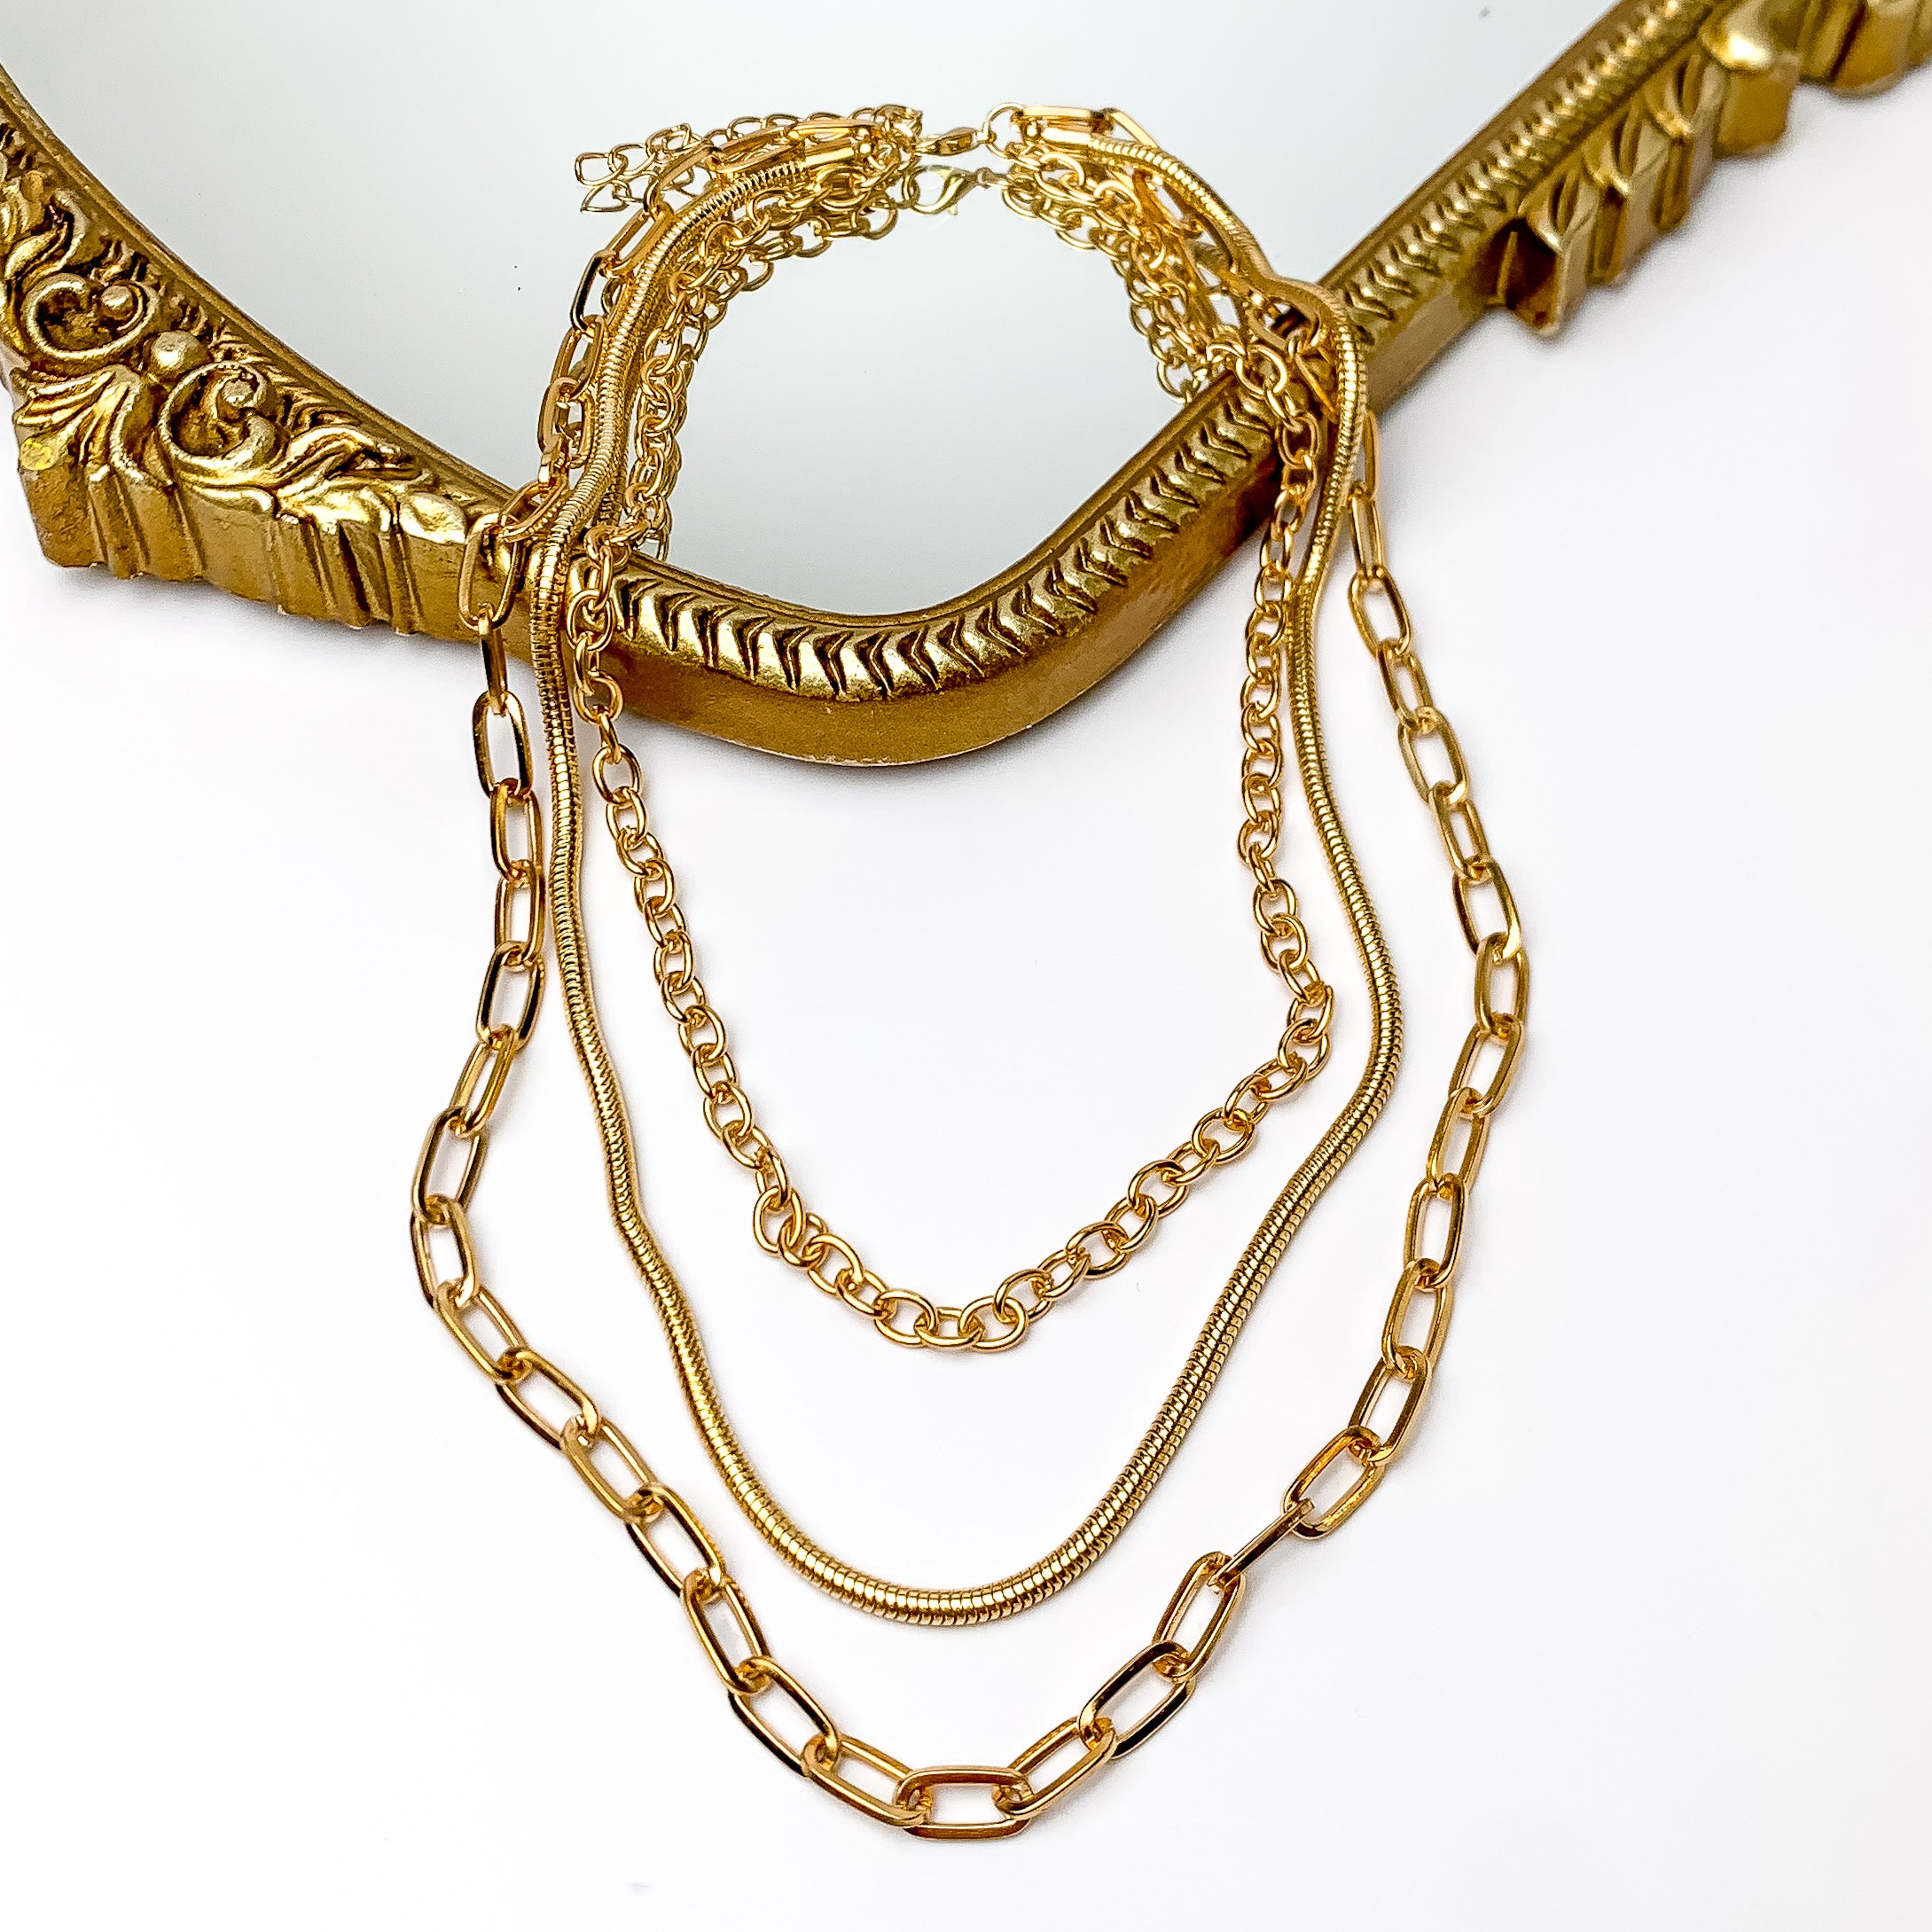 Set of three gold tone chain necklaces conneced. Pictured on a white background with a frame though it.